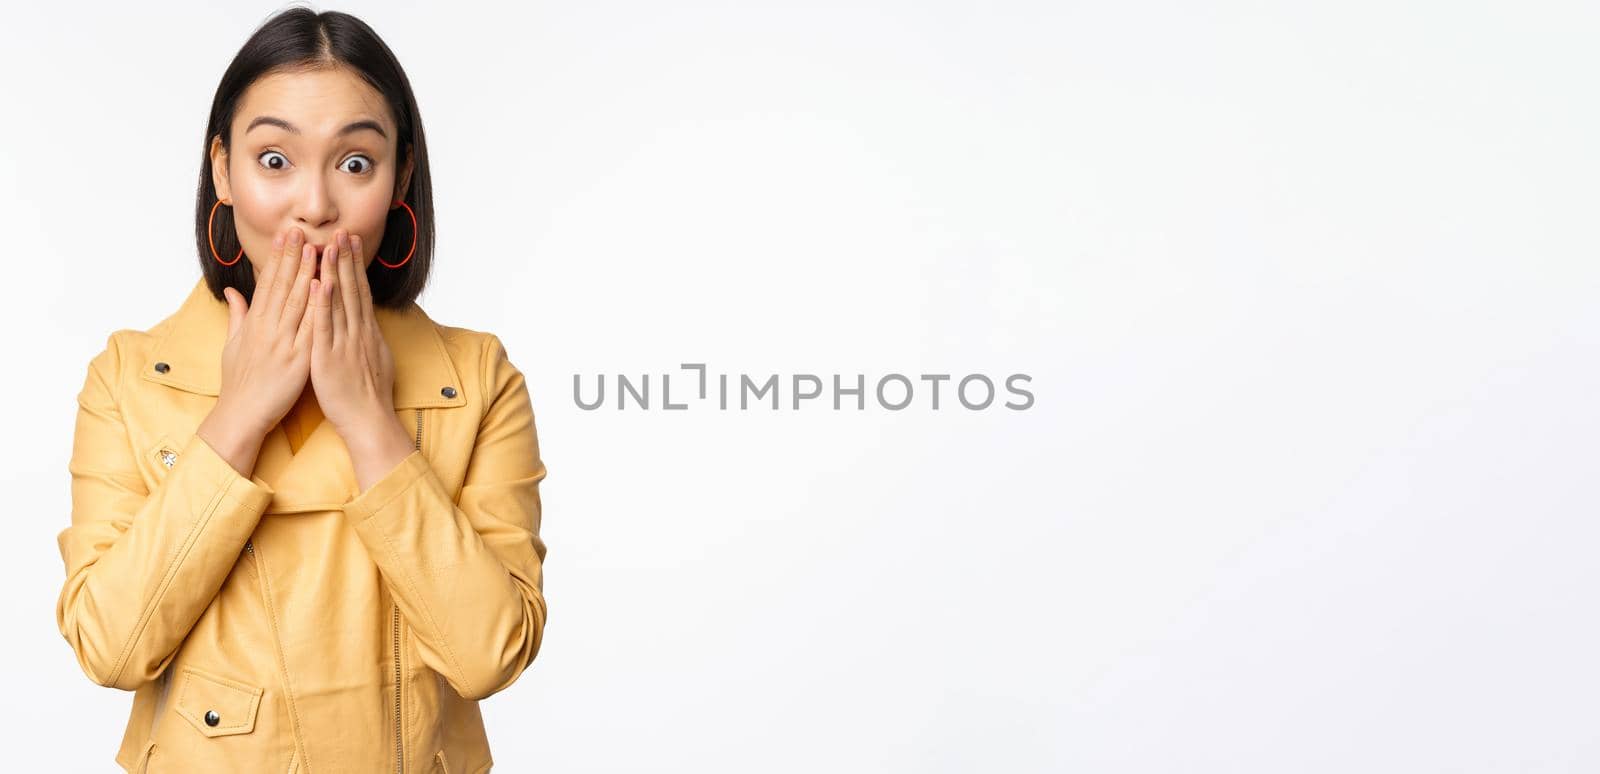 Portrait of excited asian girl looking with interest at camera, amazed reaction at big news or announcement, standing in yellow jacket over white background.